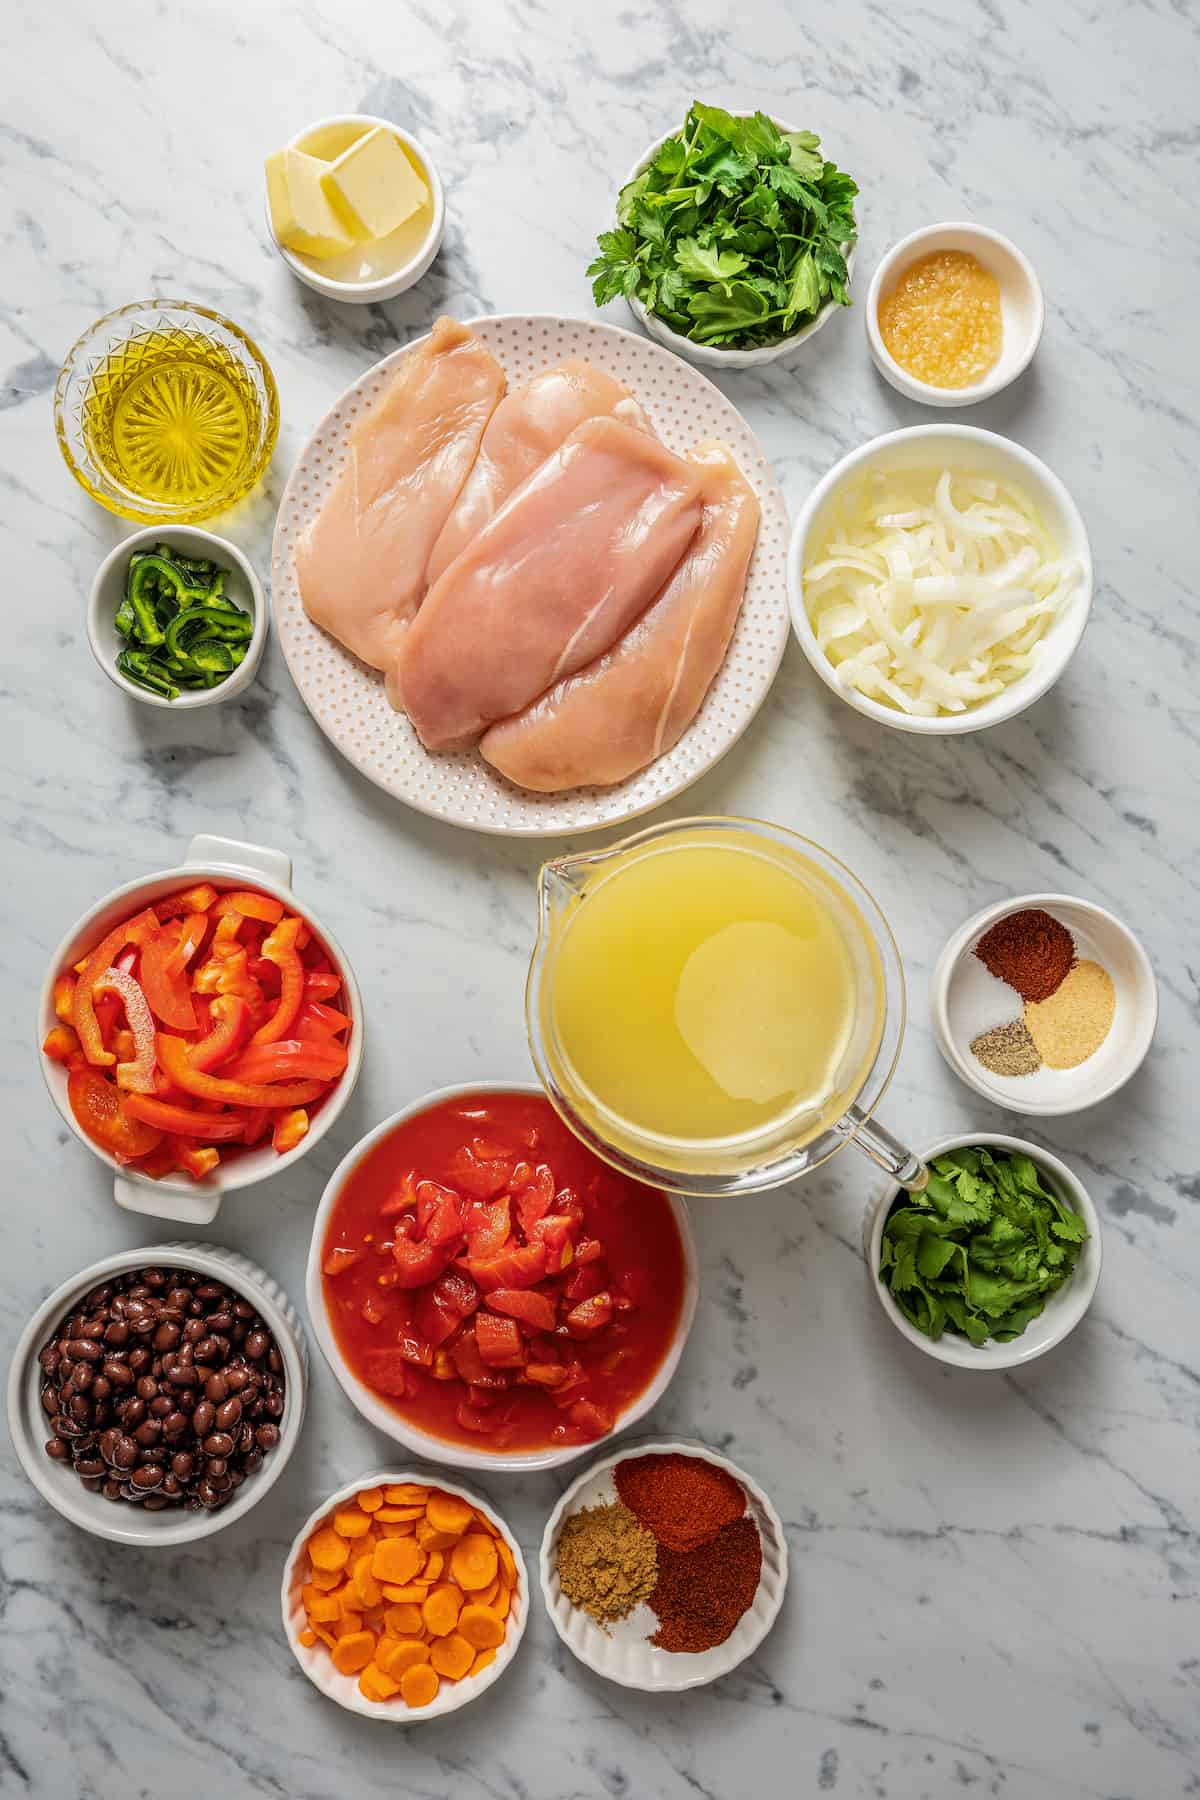 Overhead view of the ingredients needed for chicken tortilla soup: a bowl of butter, a bowl of parsley, a bowl of minced garlic, a plate of raw chicken breasts, a bowl of diced onion, a glass of olive oil, a bowl of sliced jalapeños, a bowl of sliced red bell peppers, a bowl of canned tomatoes, a bowl of canned black beans, a a bowl of carrots, two bowls of spices, a bowl of parsley, and a pyrex of chicken broth